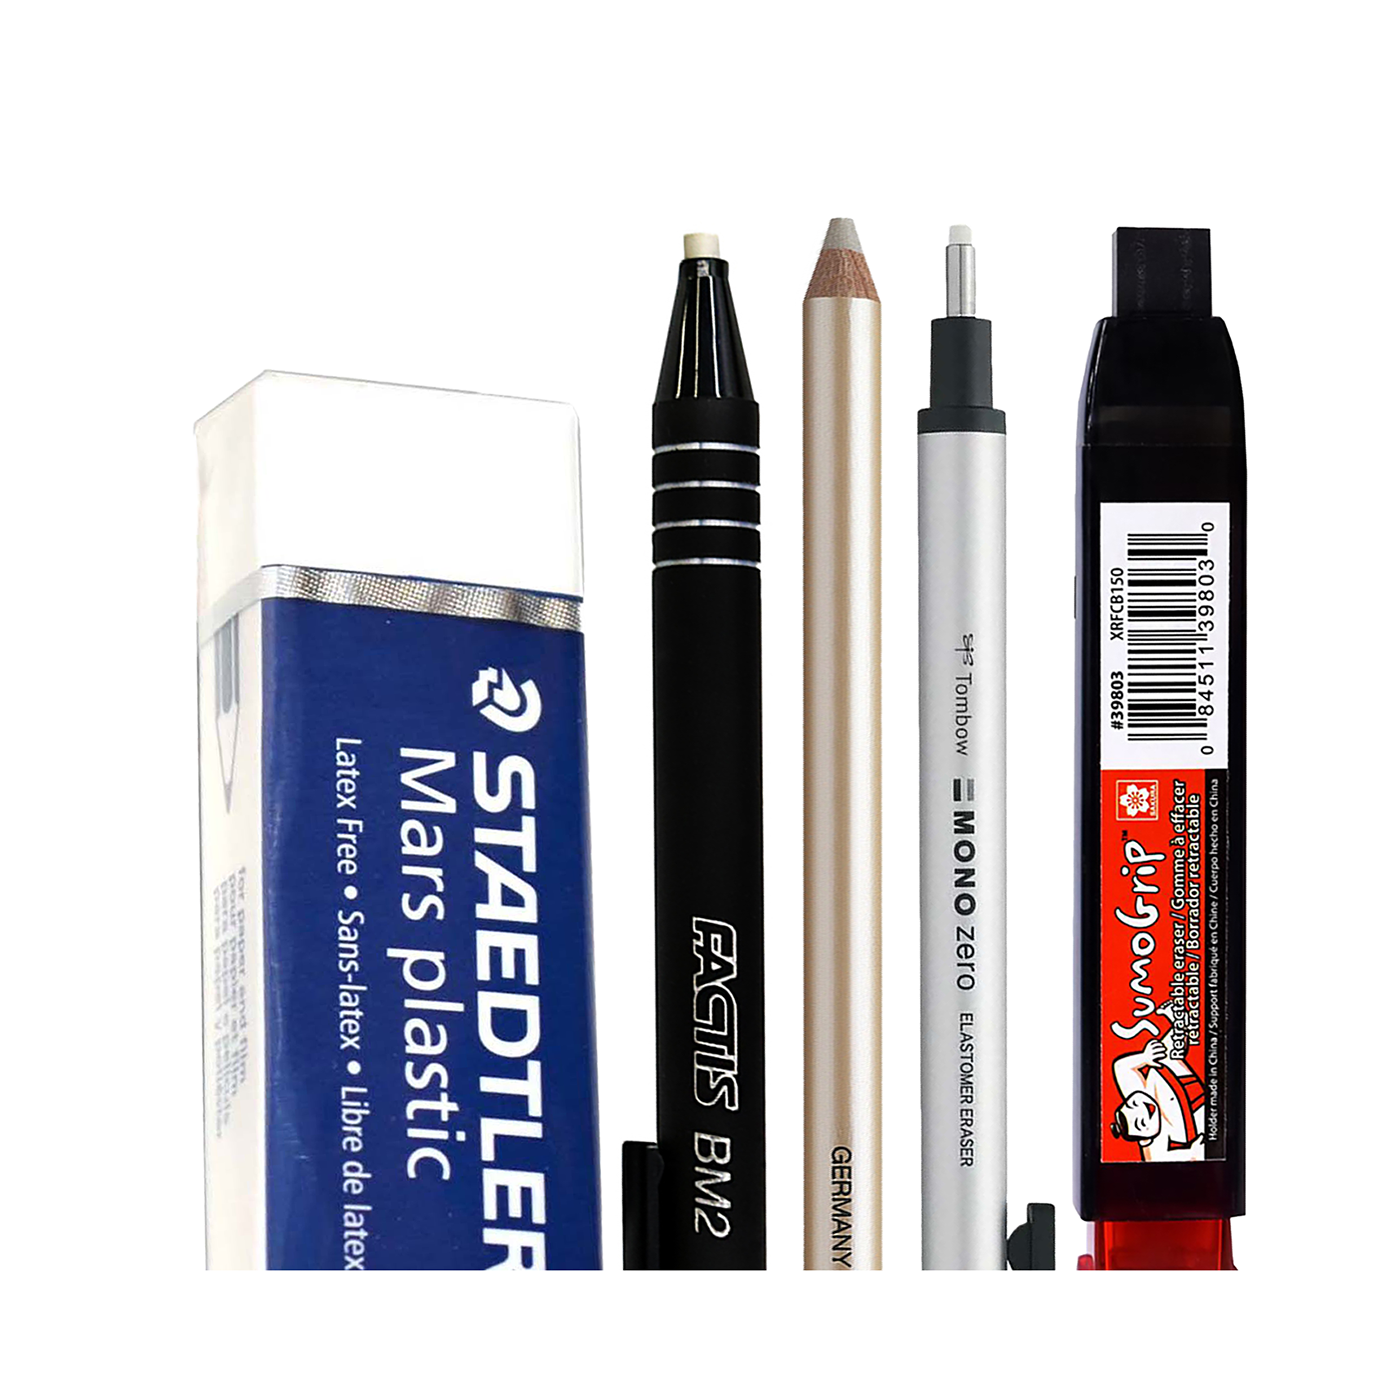 42/Pack Drawing Set Sketching Pro Art Sketch Supplies Colored Graphite  Charcoal Pencil for Artists Adults Teens Education Supply